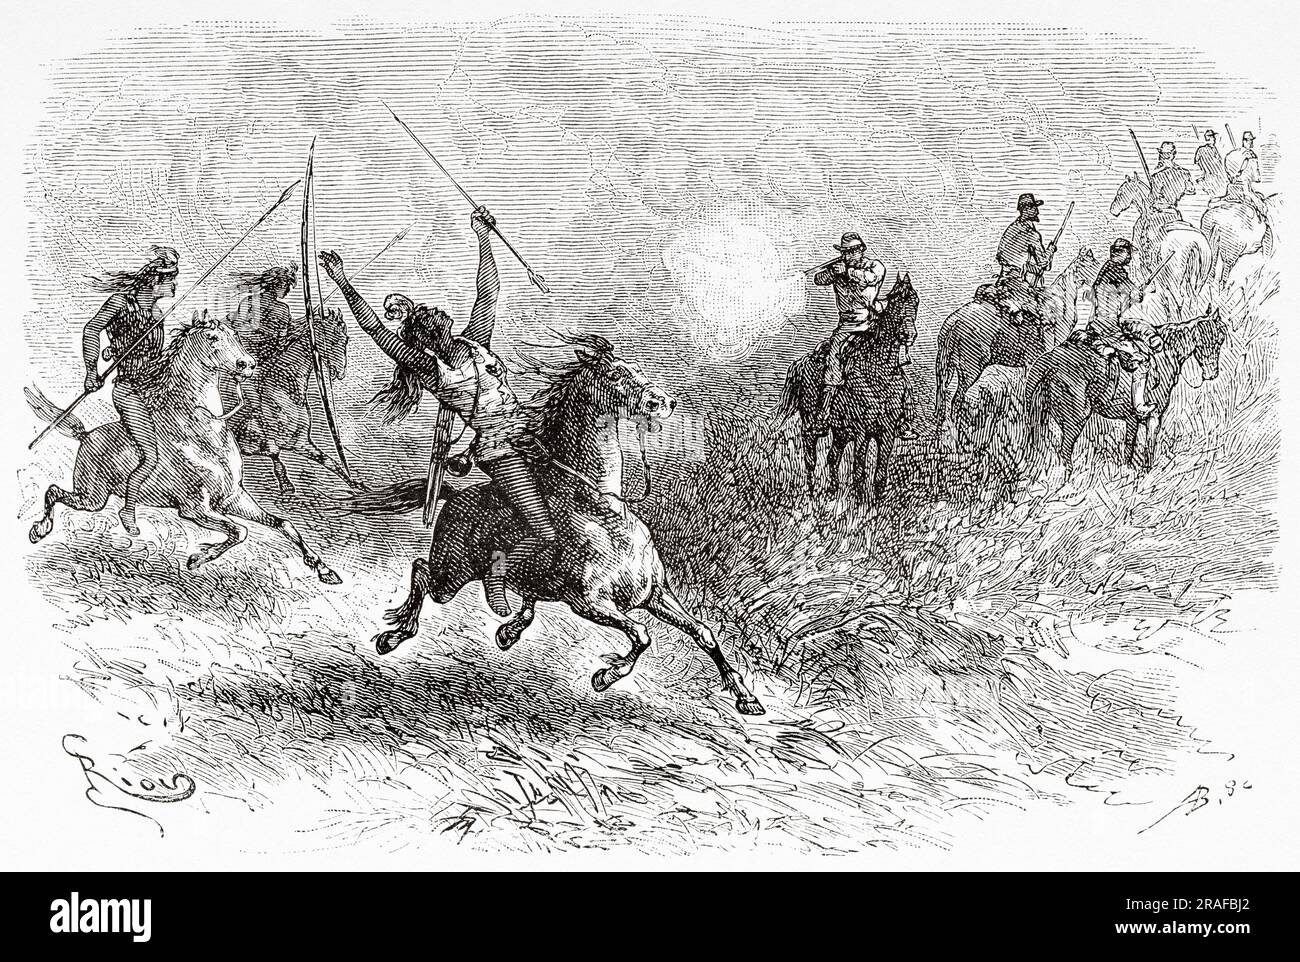 Battle against the Toba Indians, Bolivia, South America. Journey in search of the remains of the Crevaux mission by Émile-Arthur Thouar 1884. Old 19th century engraving from Le Tour du Monde 1906 Stock Photo